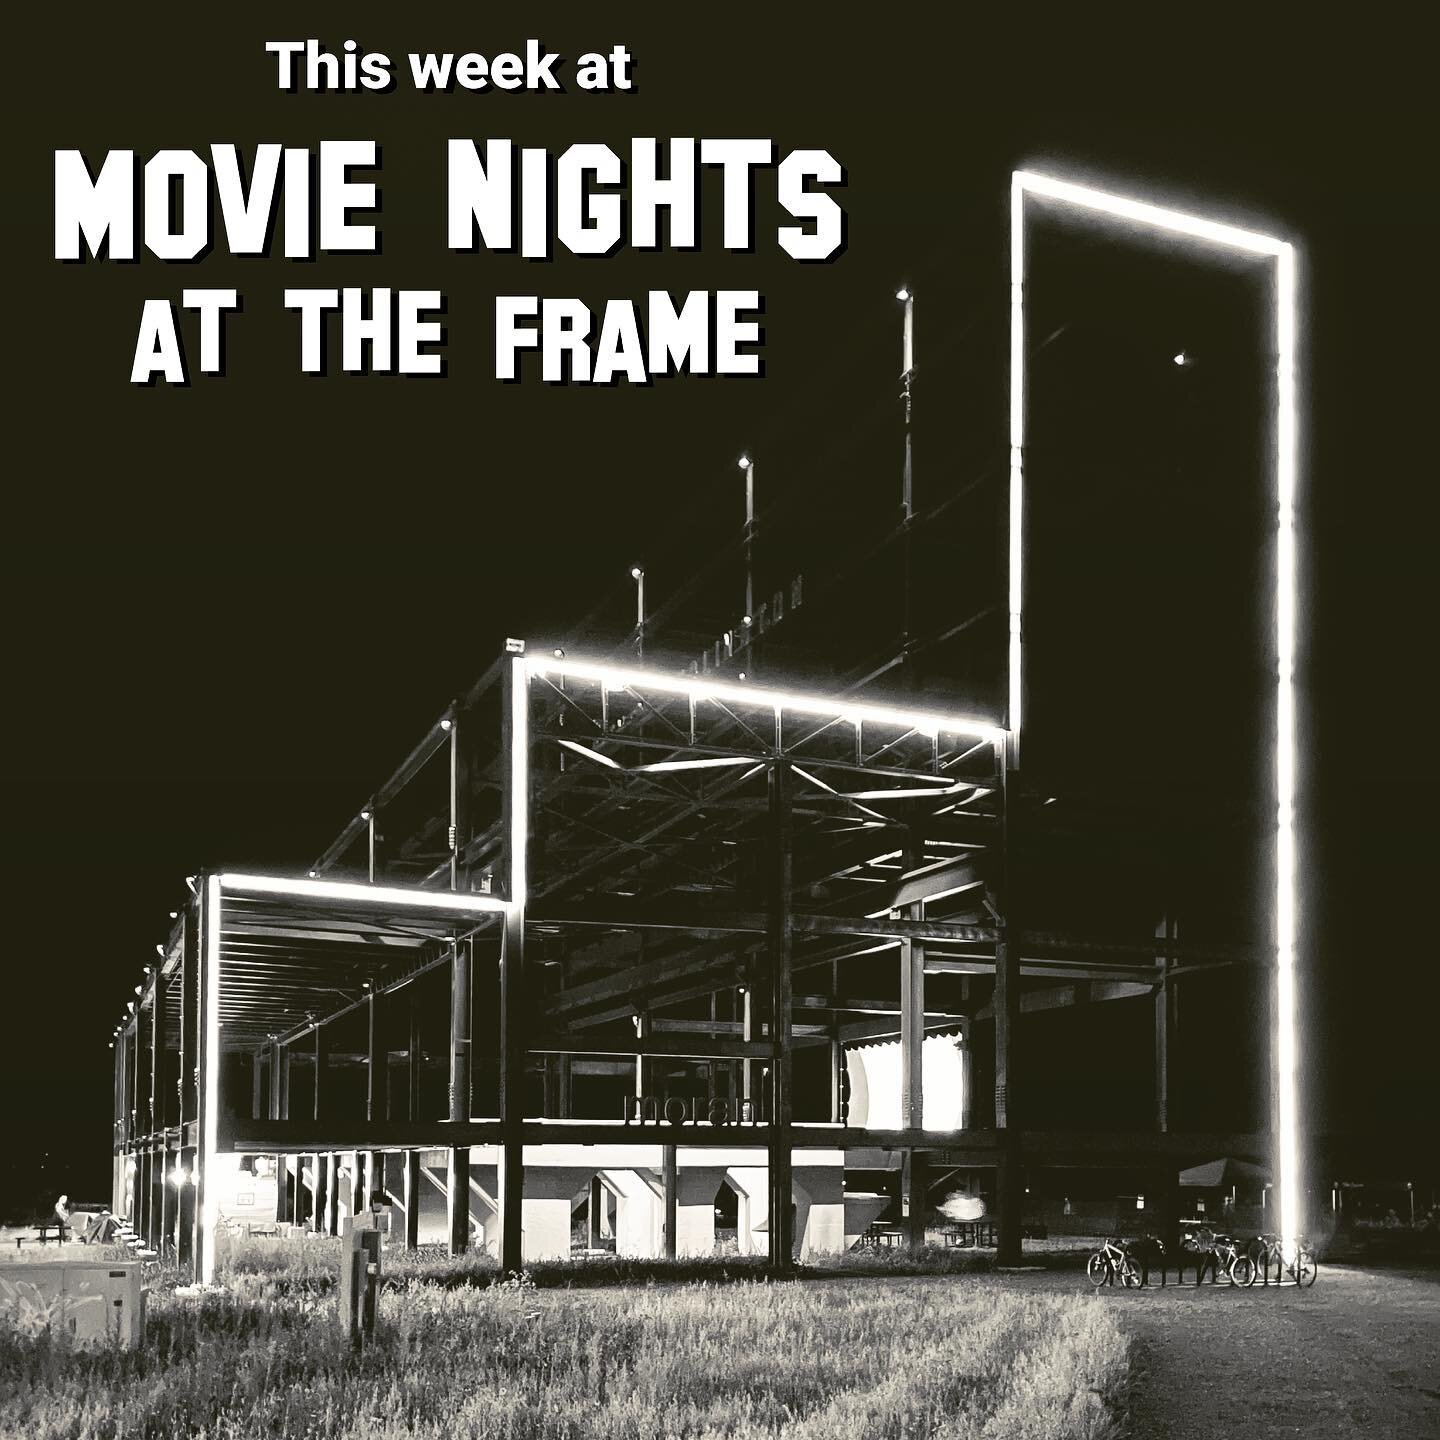 With the evenings starting to get a little bit cooler 🍁 it&rsquo;s the PERFECT time to dust off that favorite flannel , grab a cozy blanket, and catch an outdoor movie by the lake on a beautiful night!

Starting at 6pm: Lawn games, 🔥 jams curated b